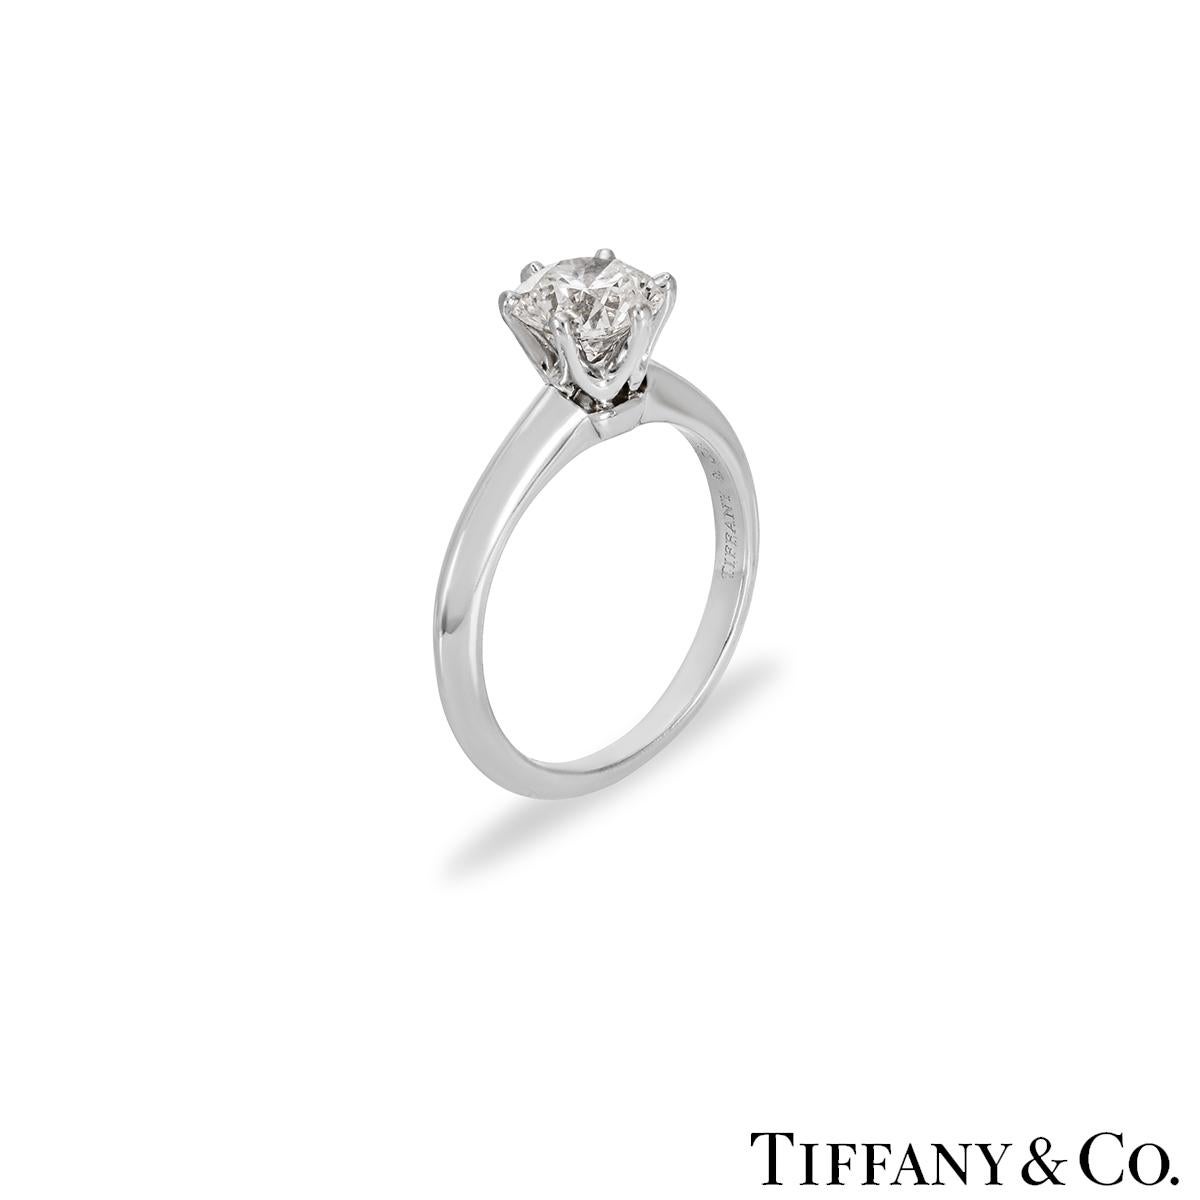 A beautiful platinum diamond ring by Tiffany & Co. from The Setting collection. The ring comprises of a round brilliant cut diamond in a 6 claw setting with a weight of 1.01ct, E colour and VS1 clarity. The ring is a UK size I½/ US size 4.5/ EU size